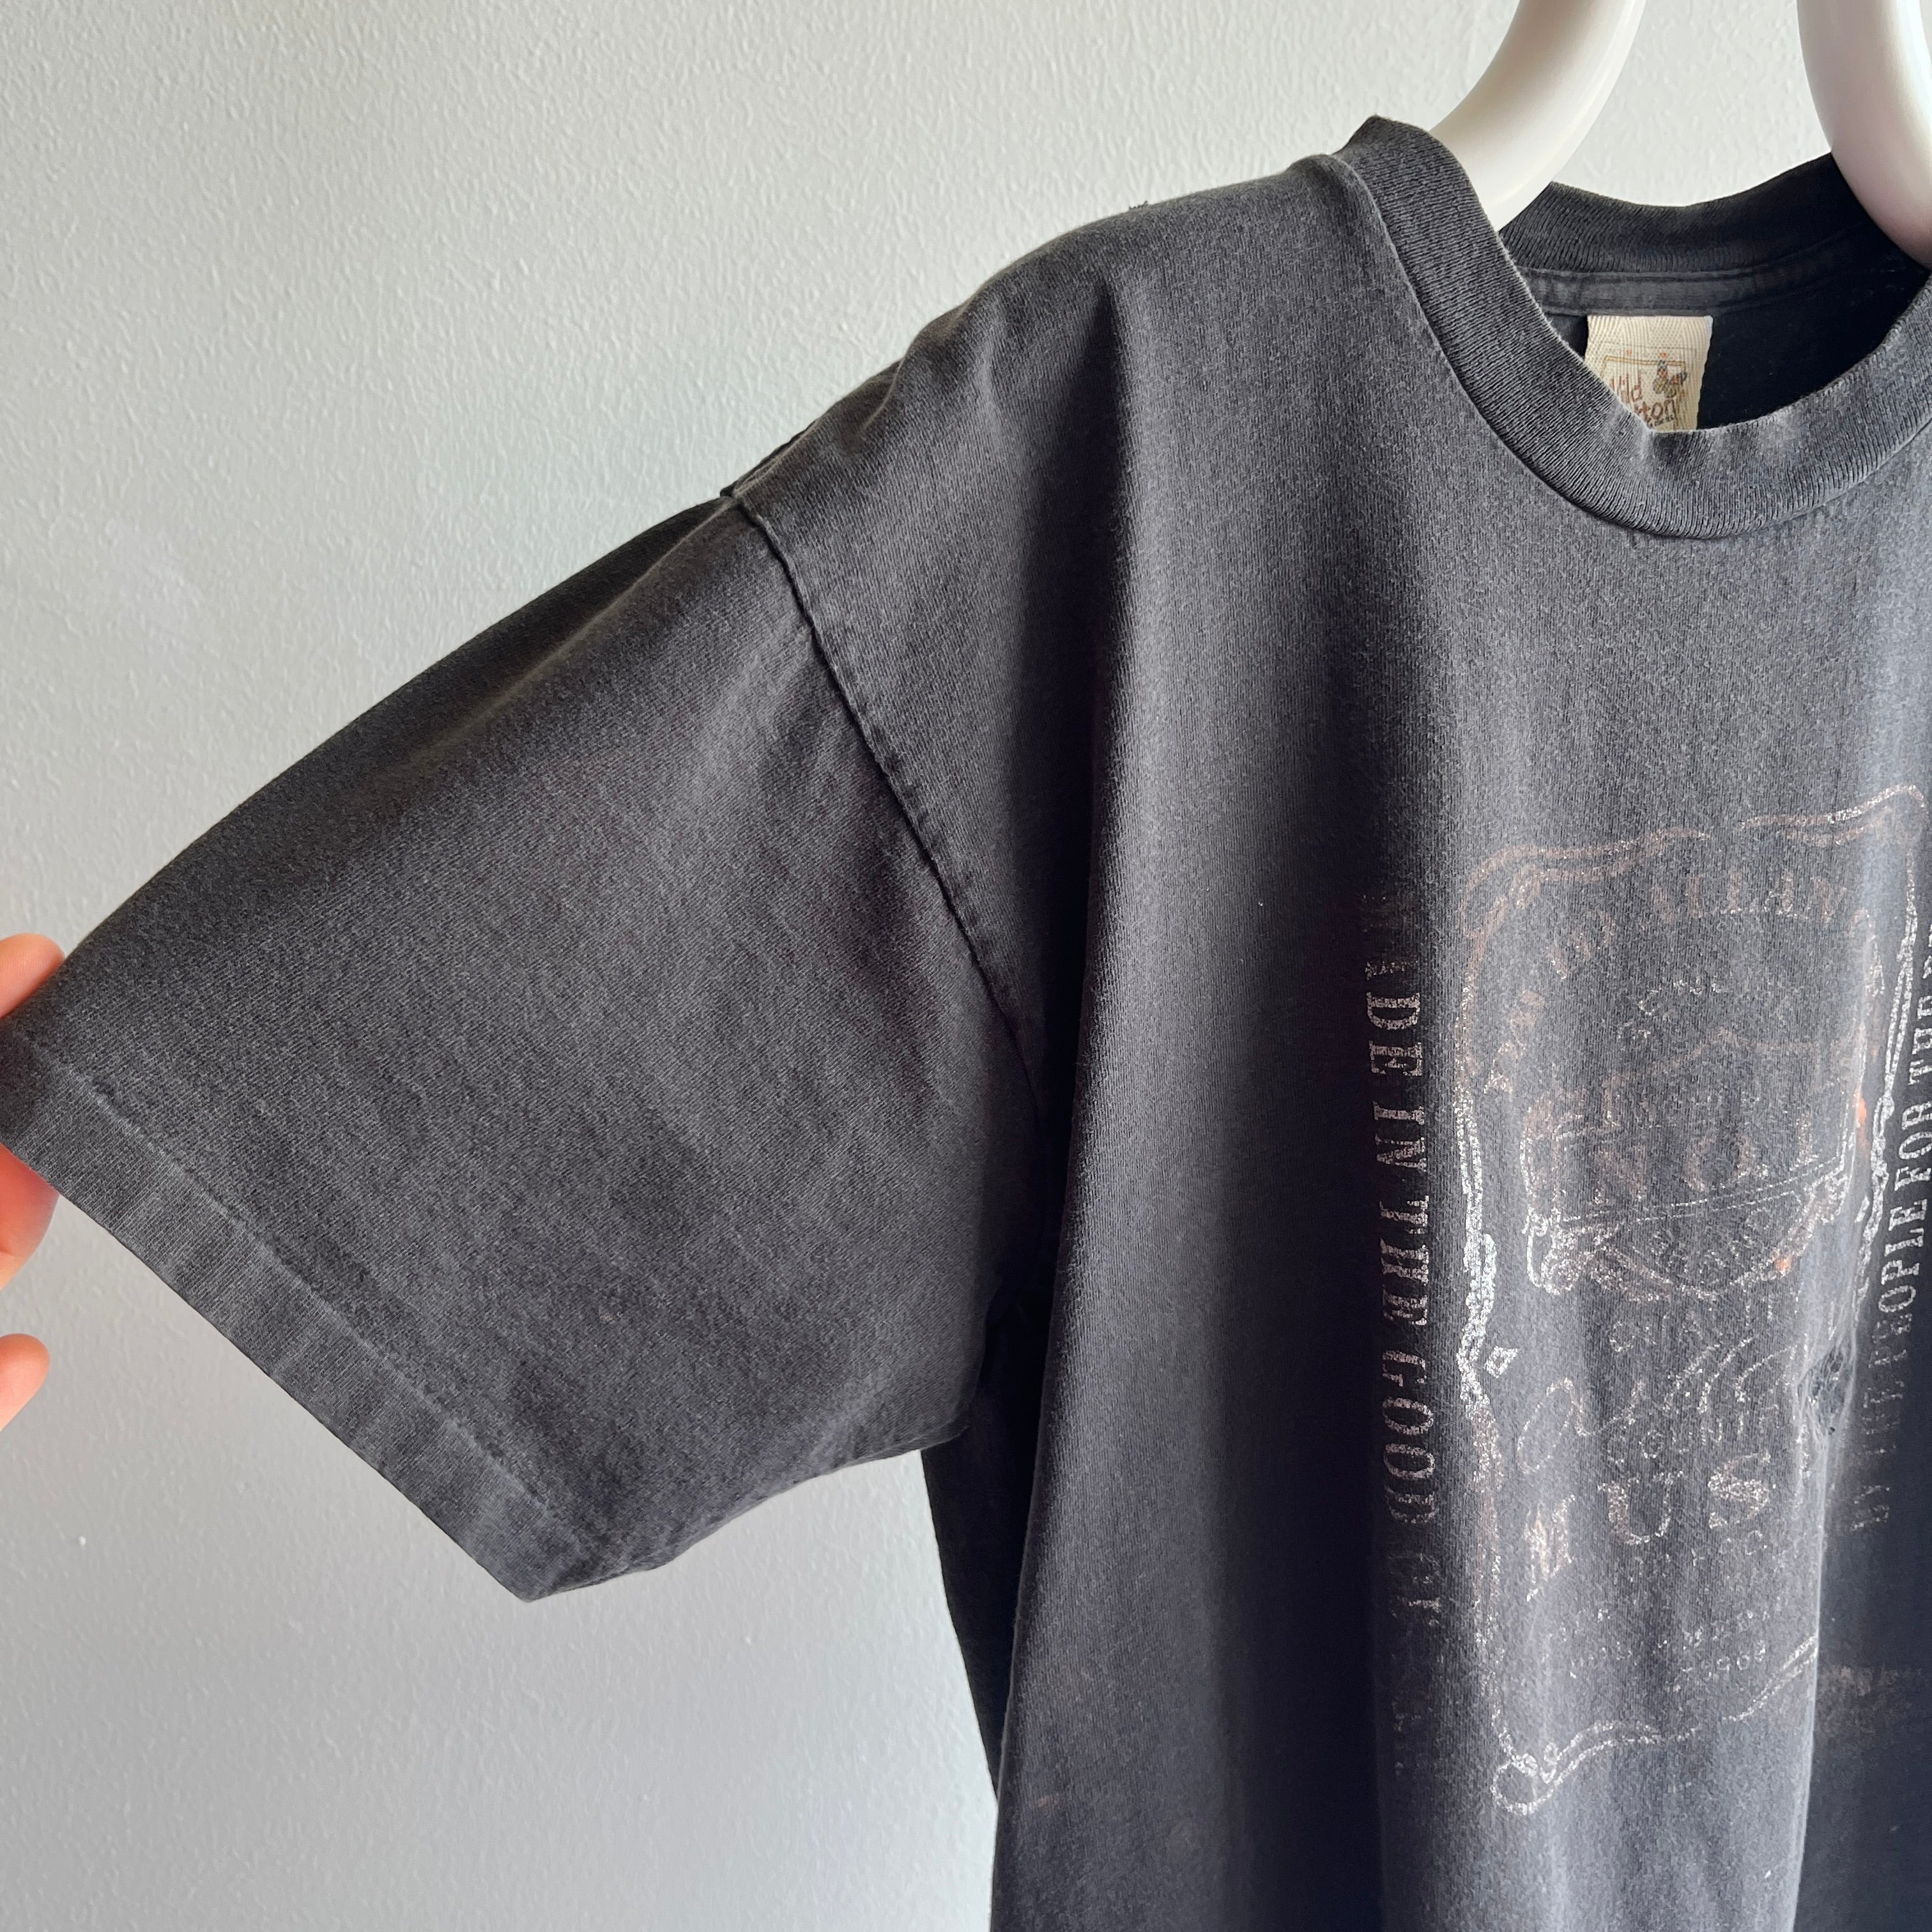 1980s Faded, Mended, Bleach and Paint Stained David Allan Coe T-Shirt